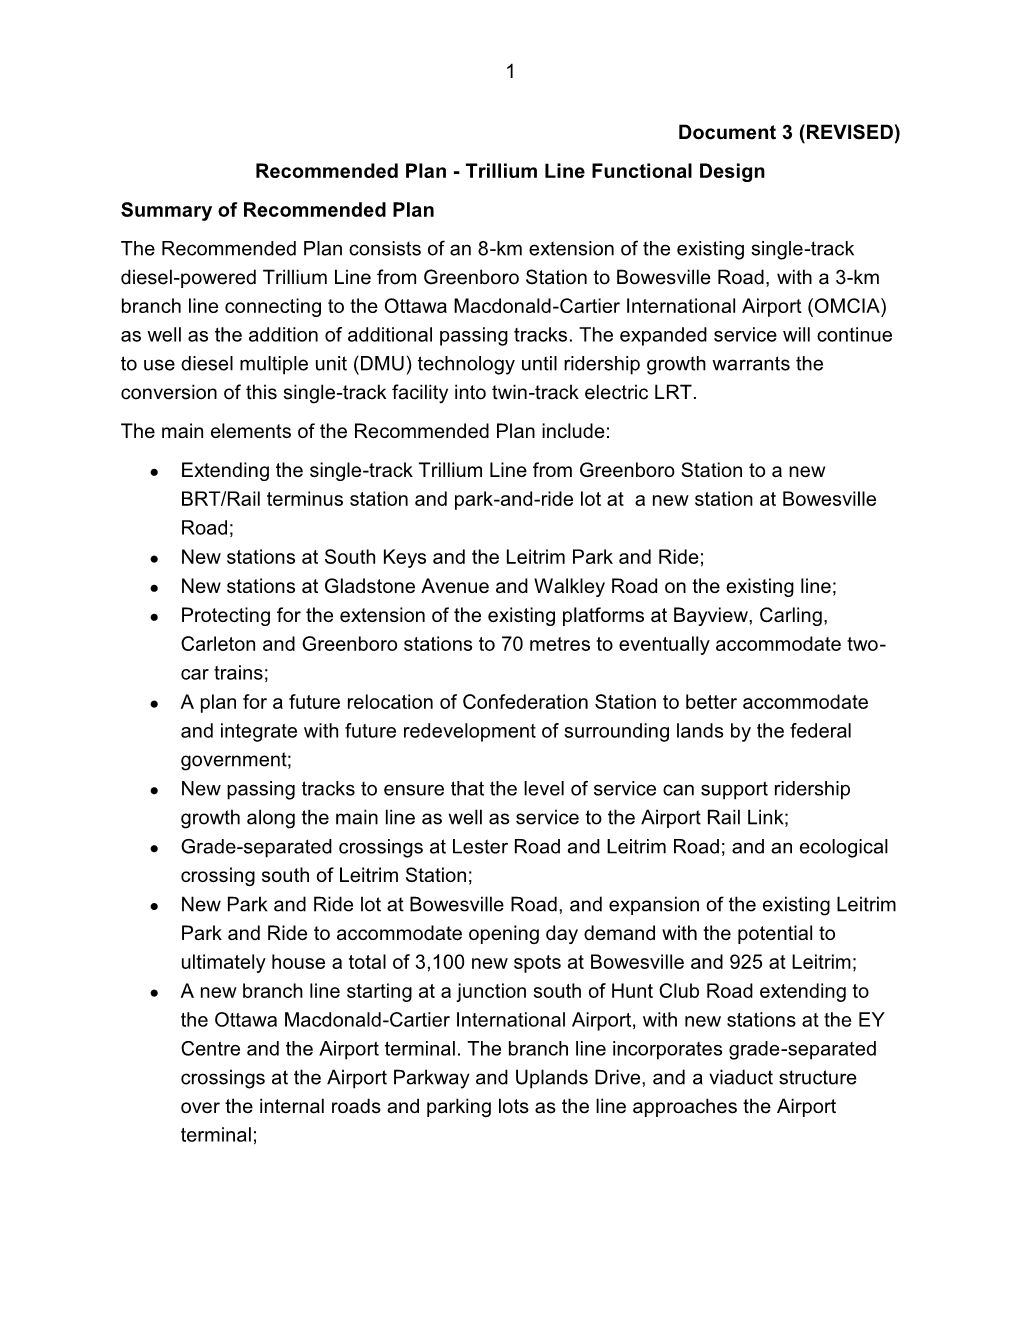 Trillium Line Functional Design Summary of Recommended Plan